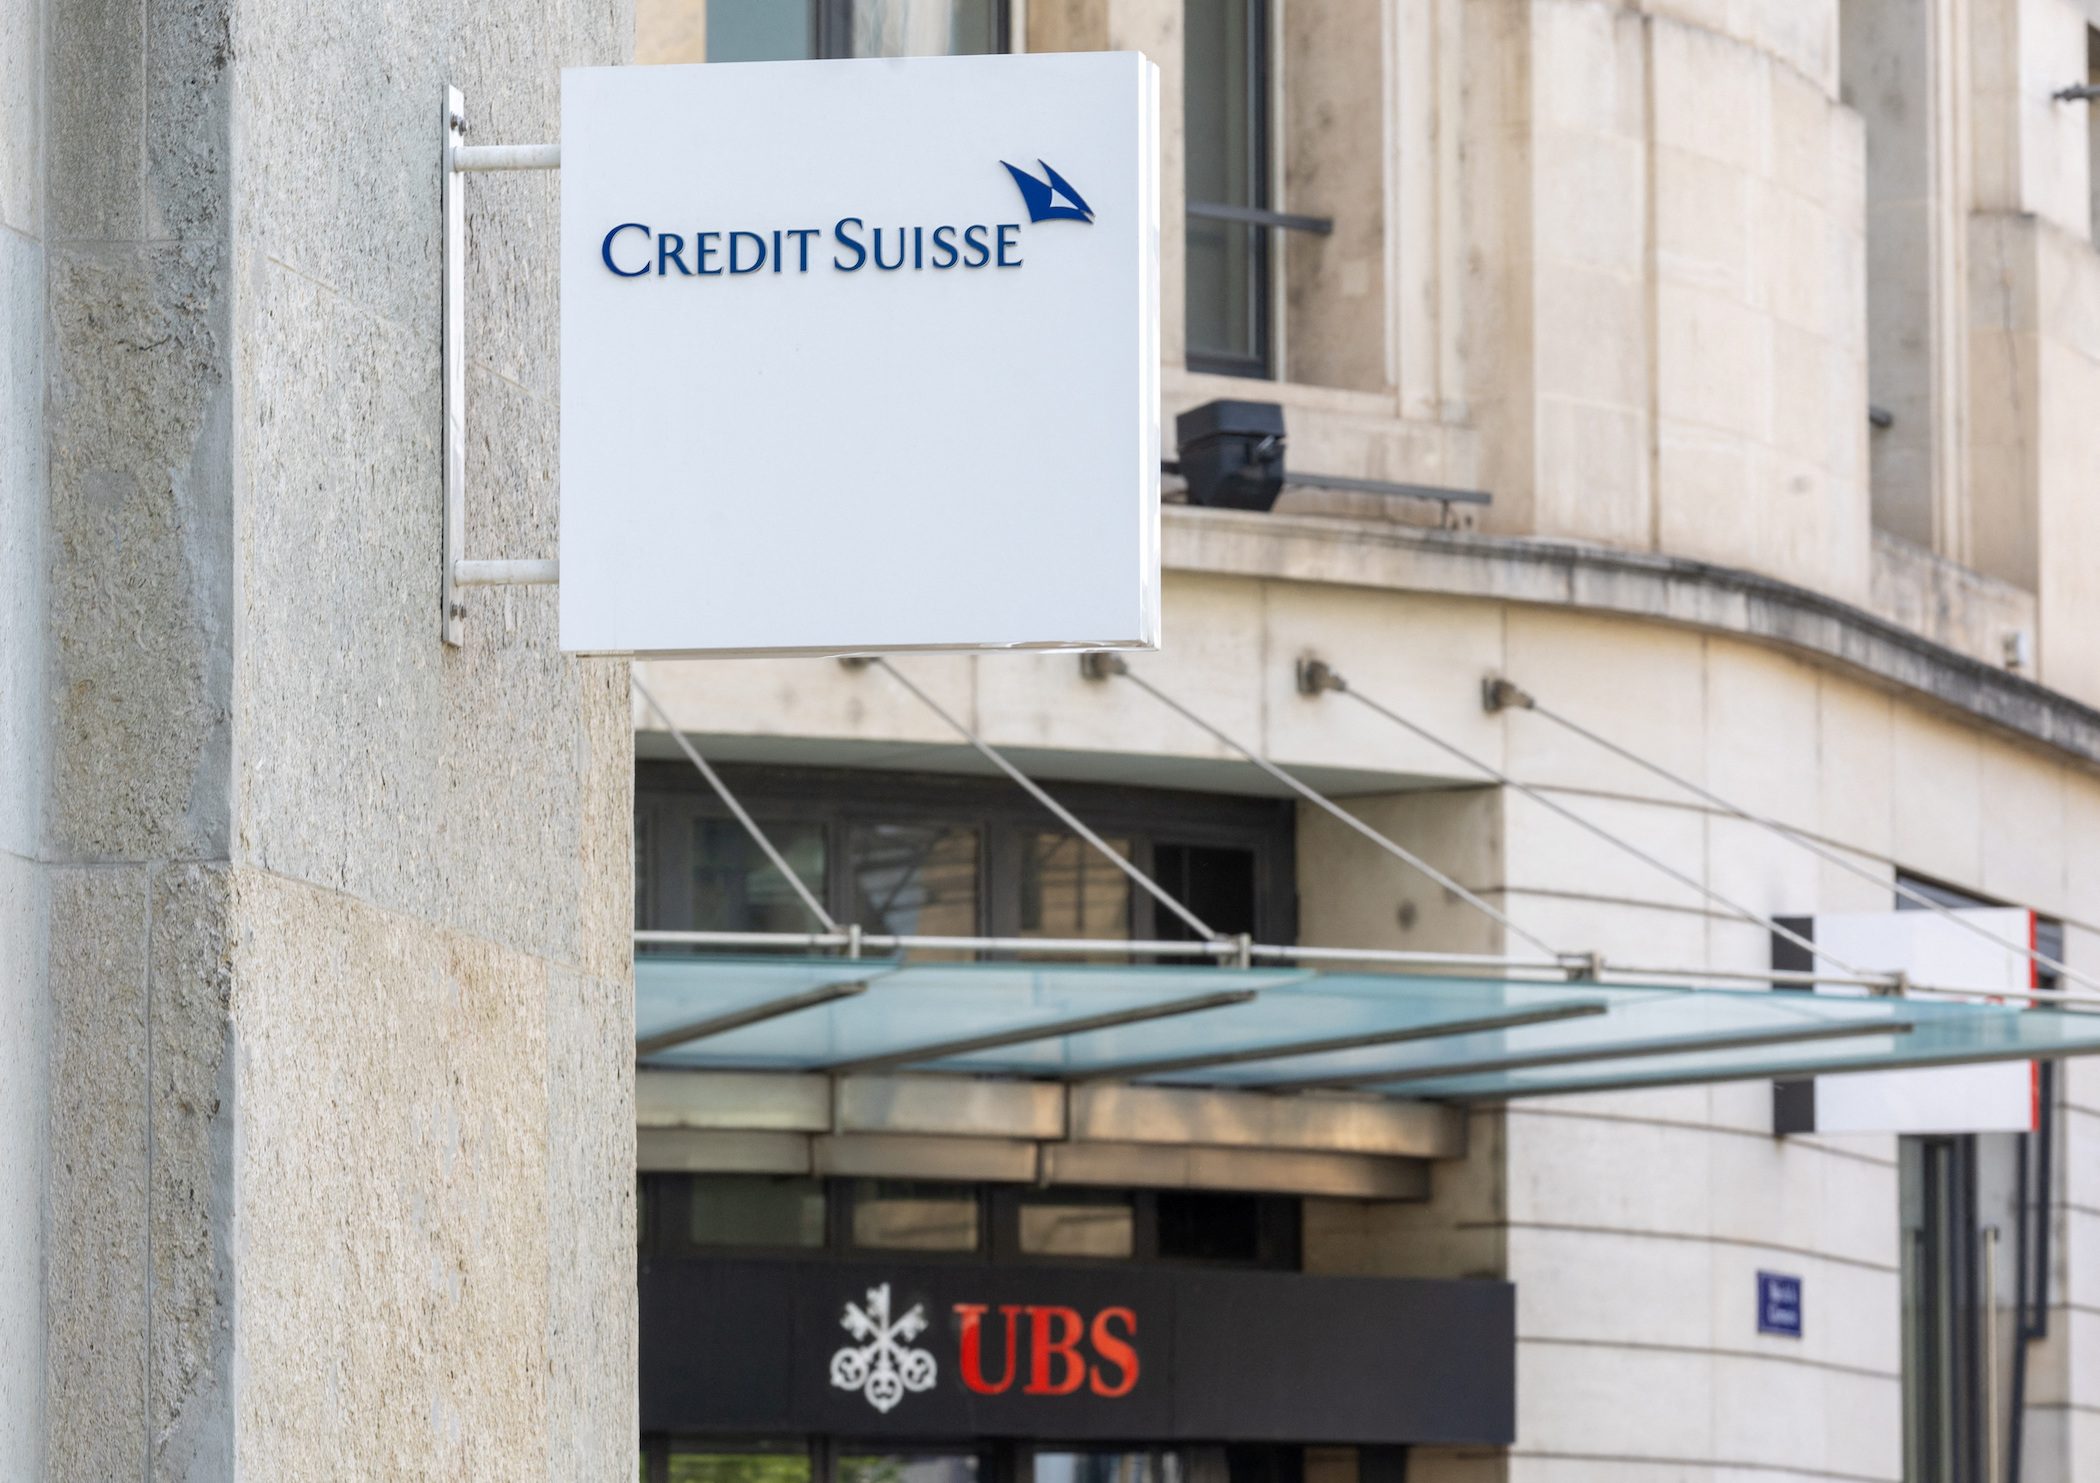 UBS completes Credit Suisse takeover to become wealth management behemoth